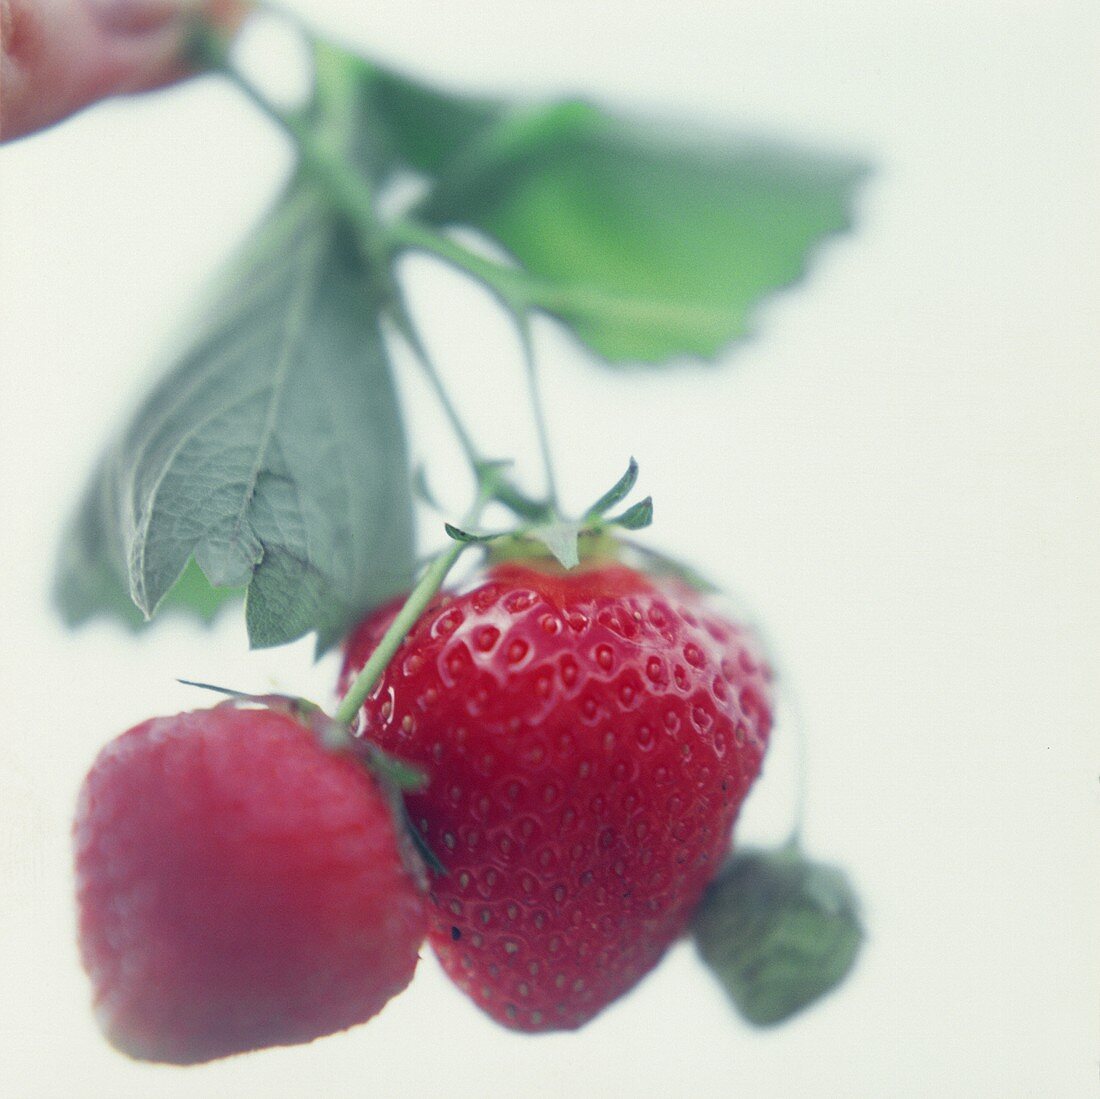 Two Strawberries; Soft Focus